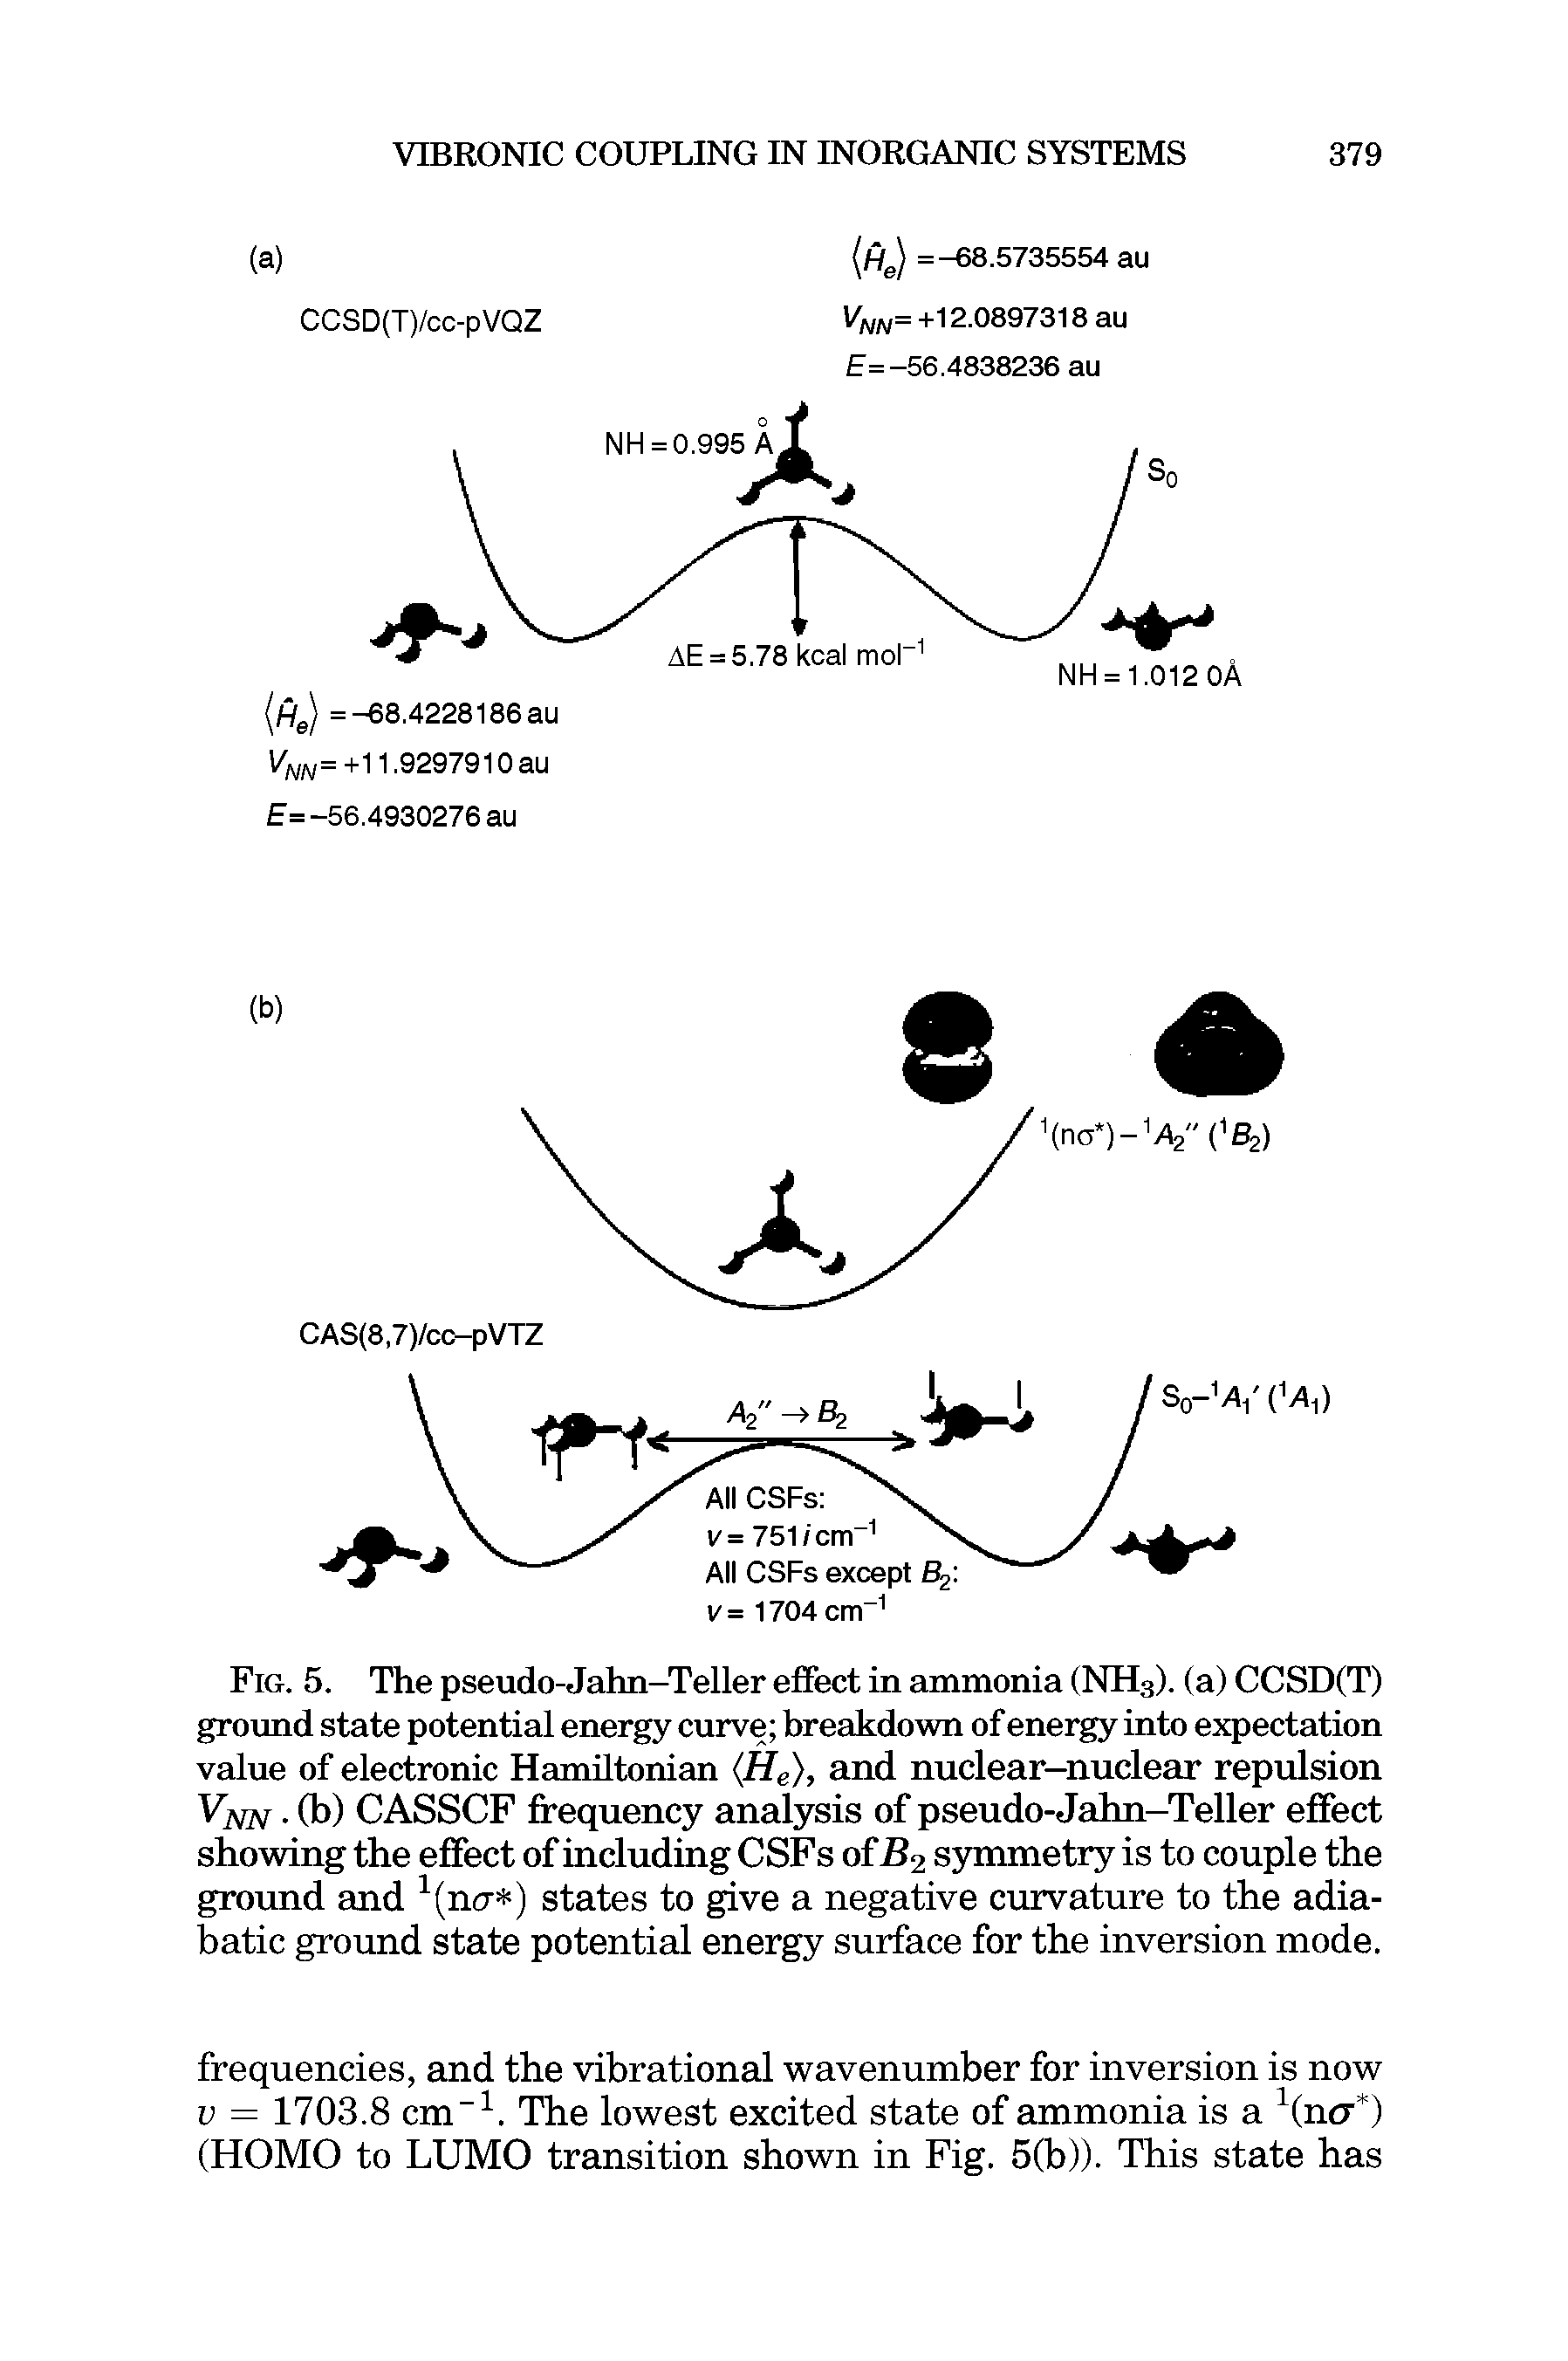 Fig. 5. The pseudo-Jahn-Teller effect in ammonia (NH3). (a) CCSD(T) ground state potential energy curve breakdown of energy into expectation value of electronic Hamiltonian (He), and nuclear-nuclear repulsion VNN. (b) CASSCF frequency analysis of pseudo-Jahn-Teller effect showing the effect of including CSFs of B2 symmetry is to couple the ground and 1(ncr ) states to give a negative curvature to the adiabatic ground state potential energy surface for the inversion mode.